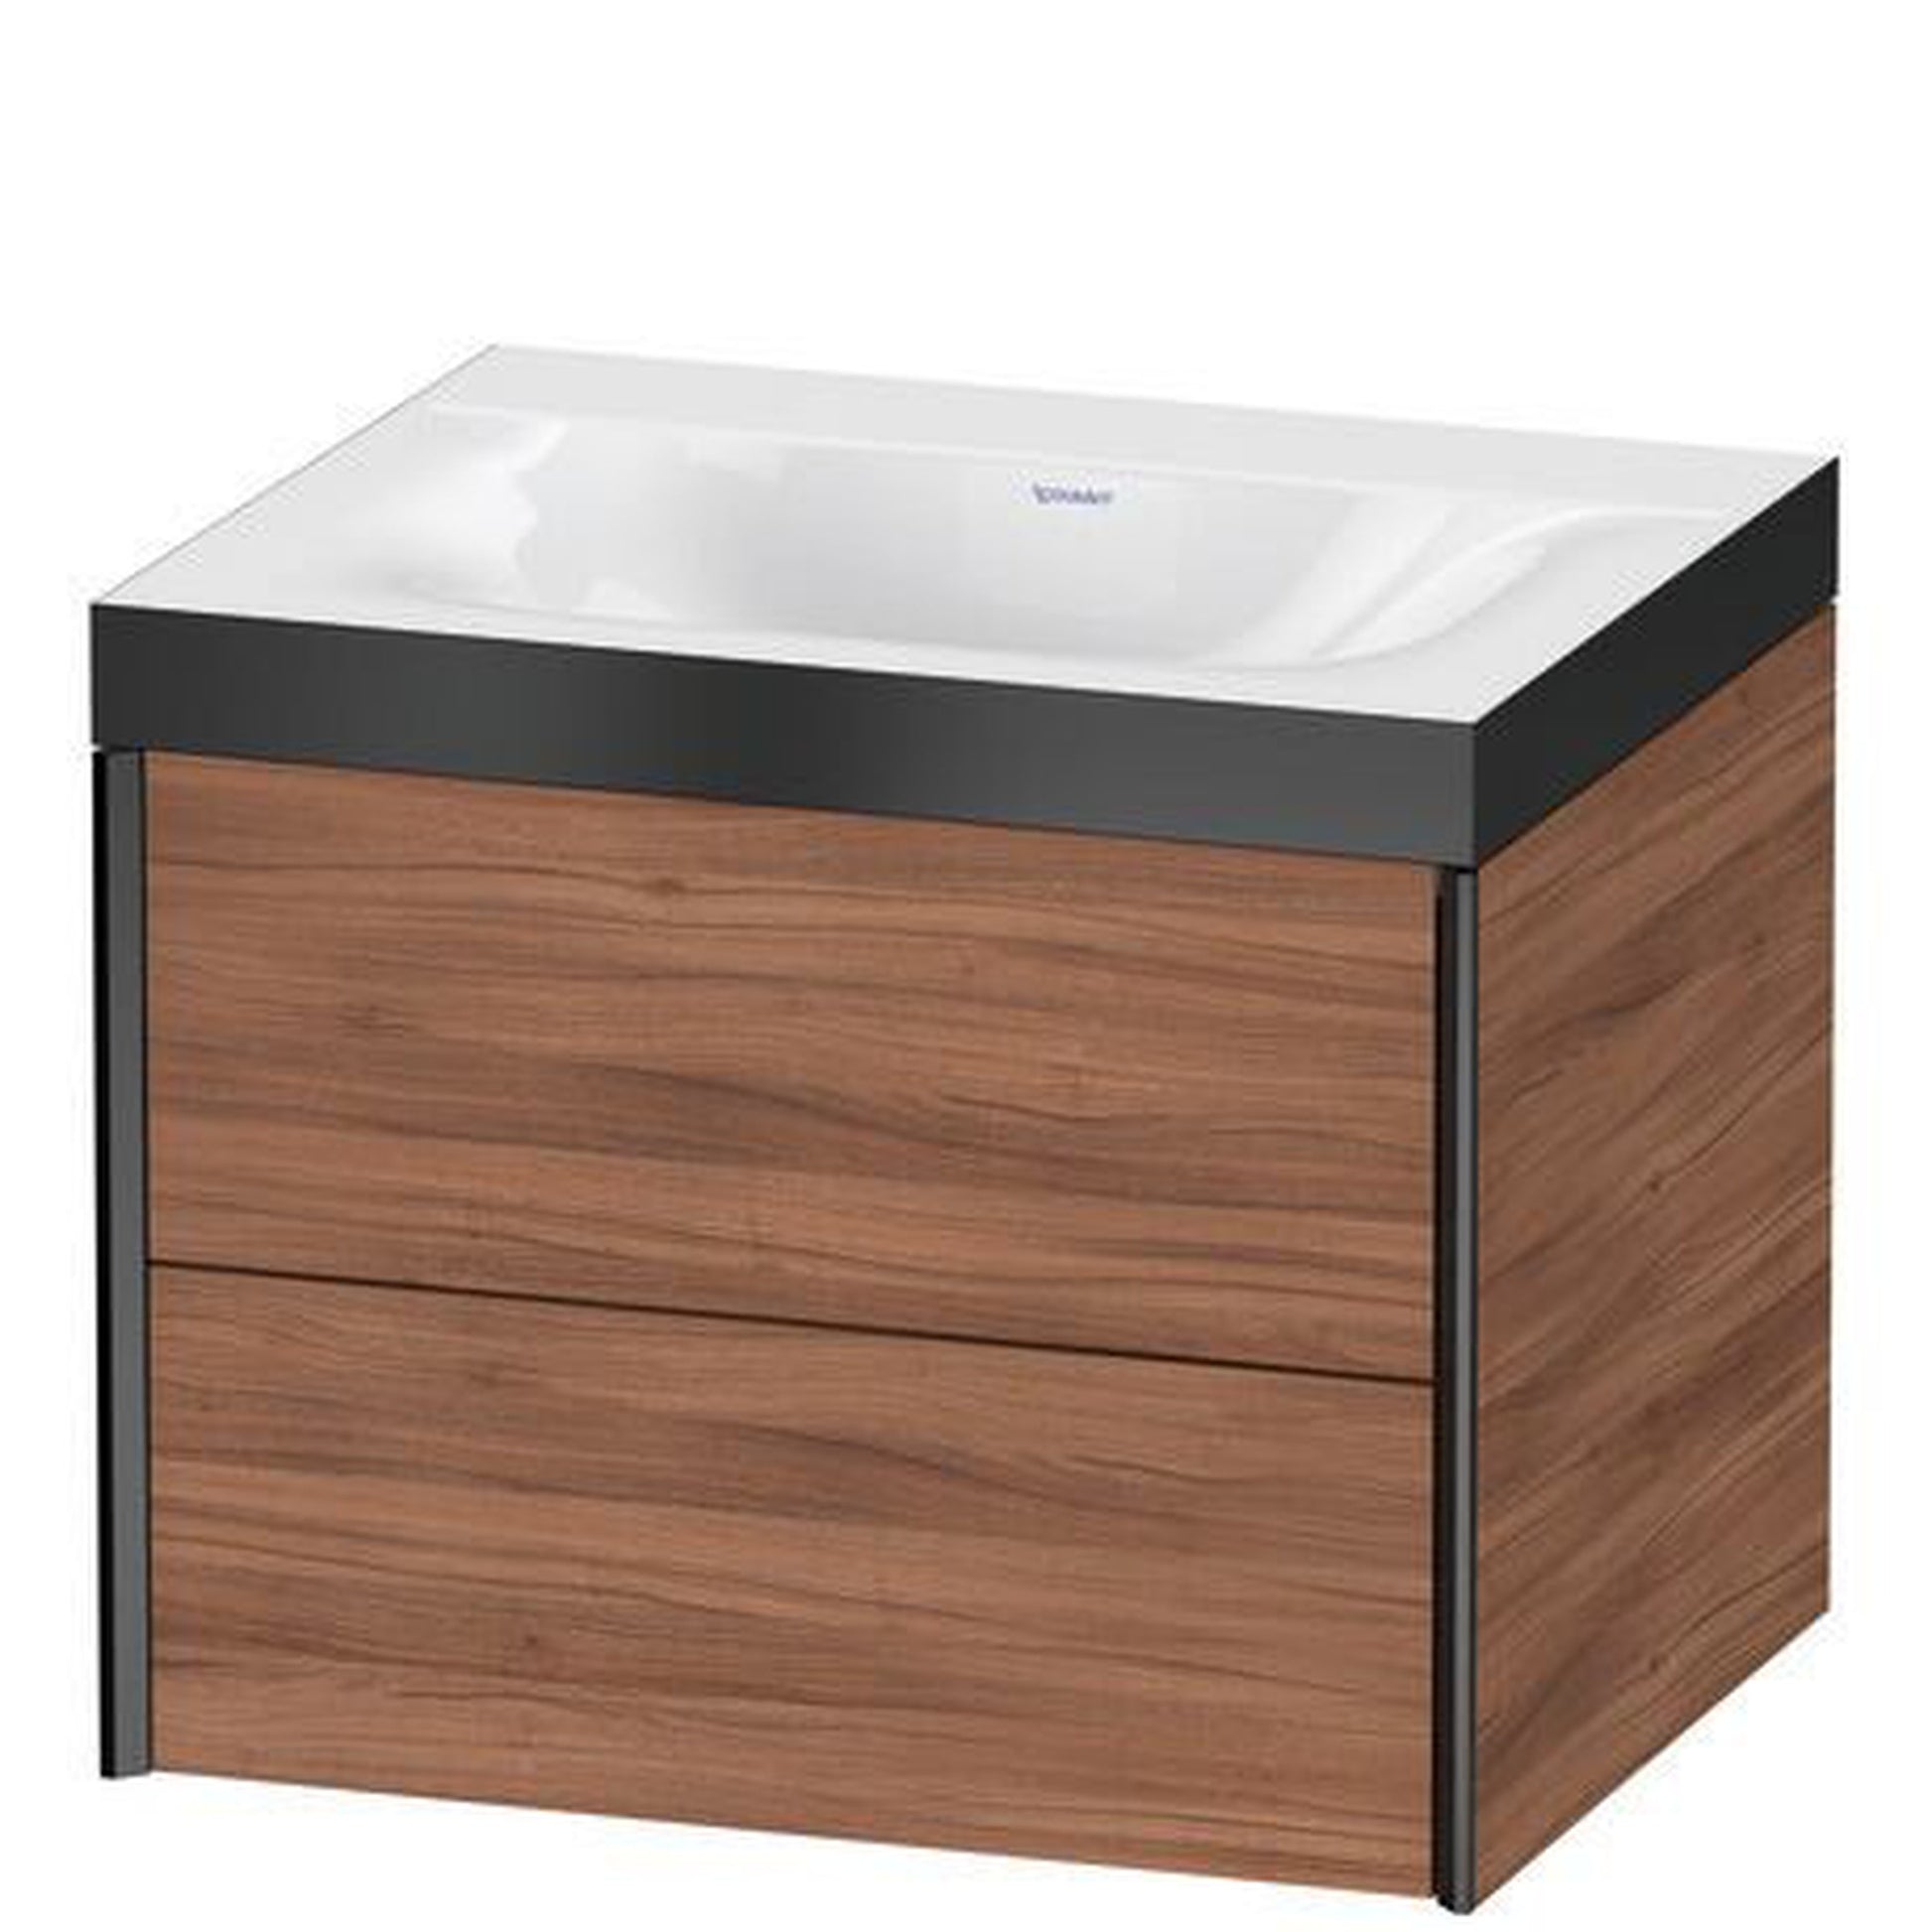 Duravit Xviu 24" x 20" x 19" Two Drawer C-Bonded Wall-Mount Vanity Kit Without Tap Hole, Walnut (XV4614NB279P)